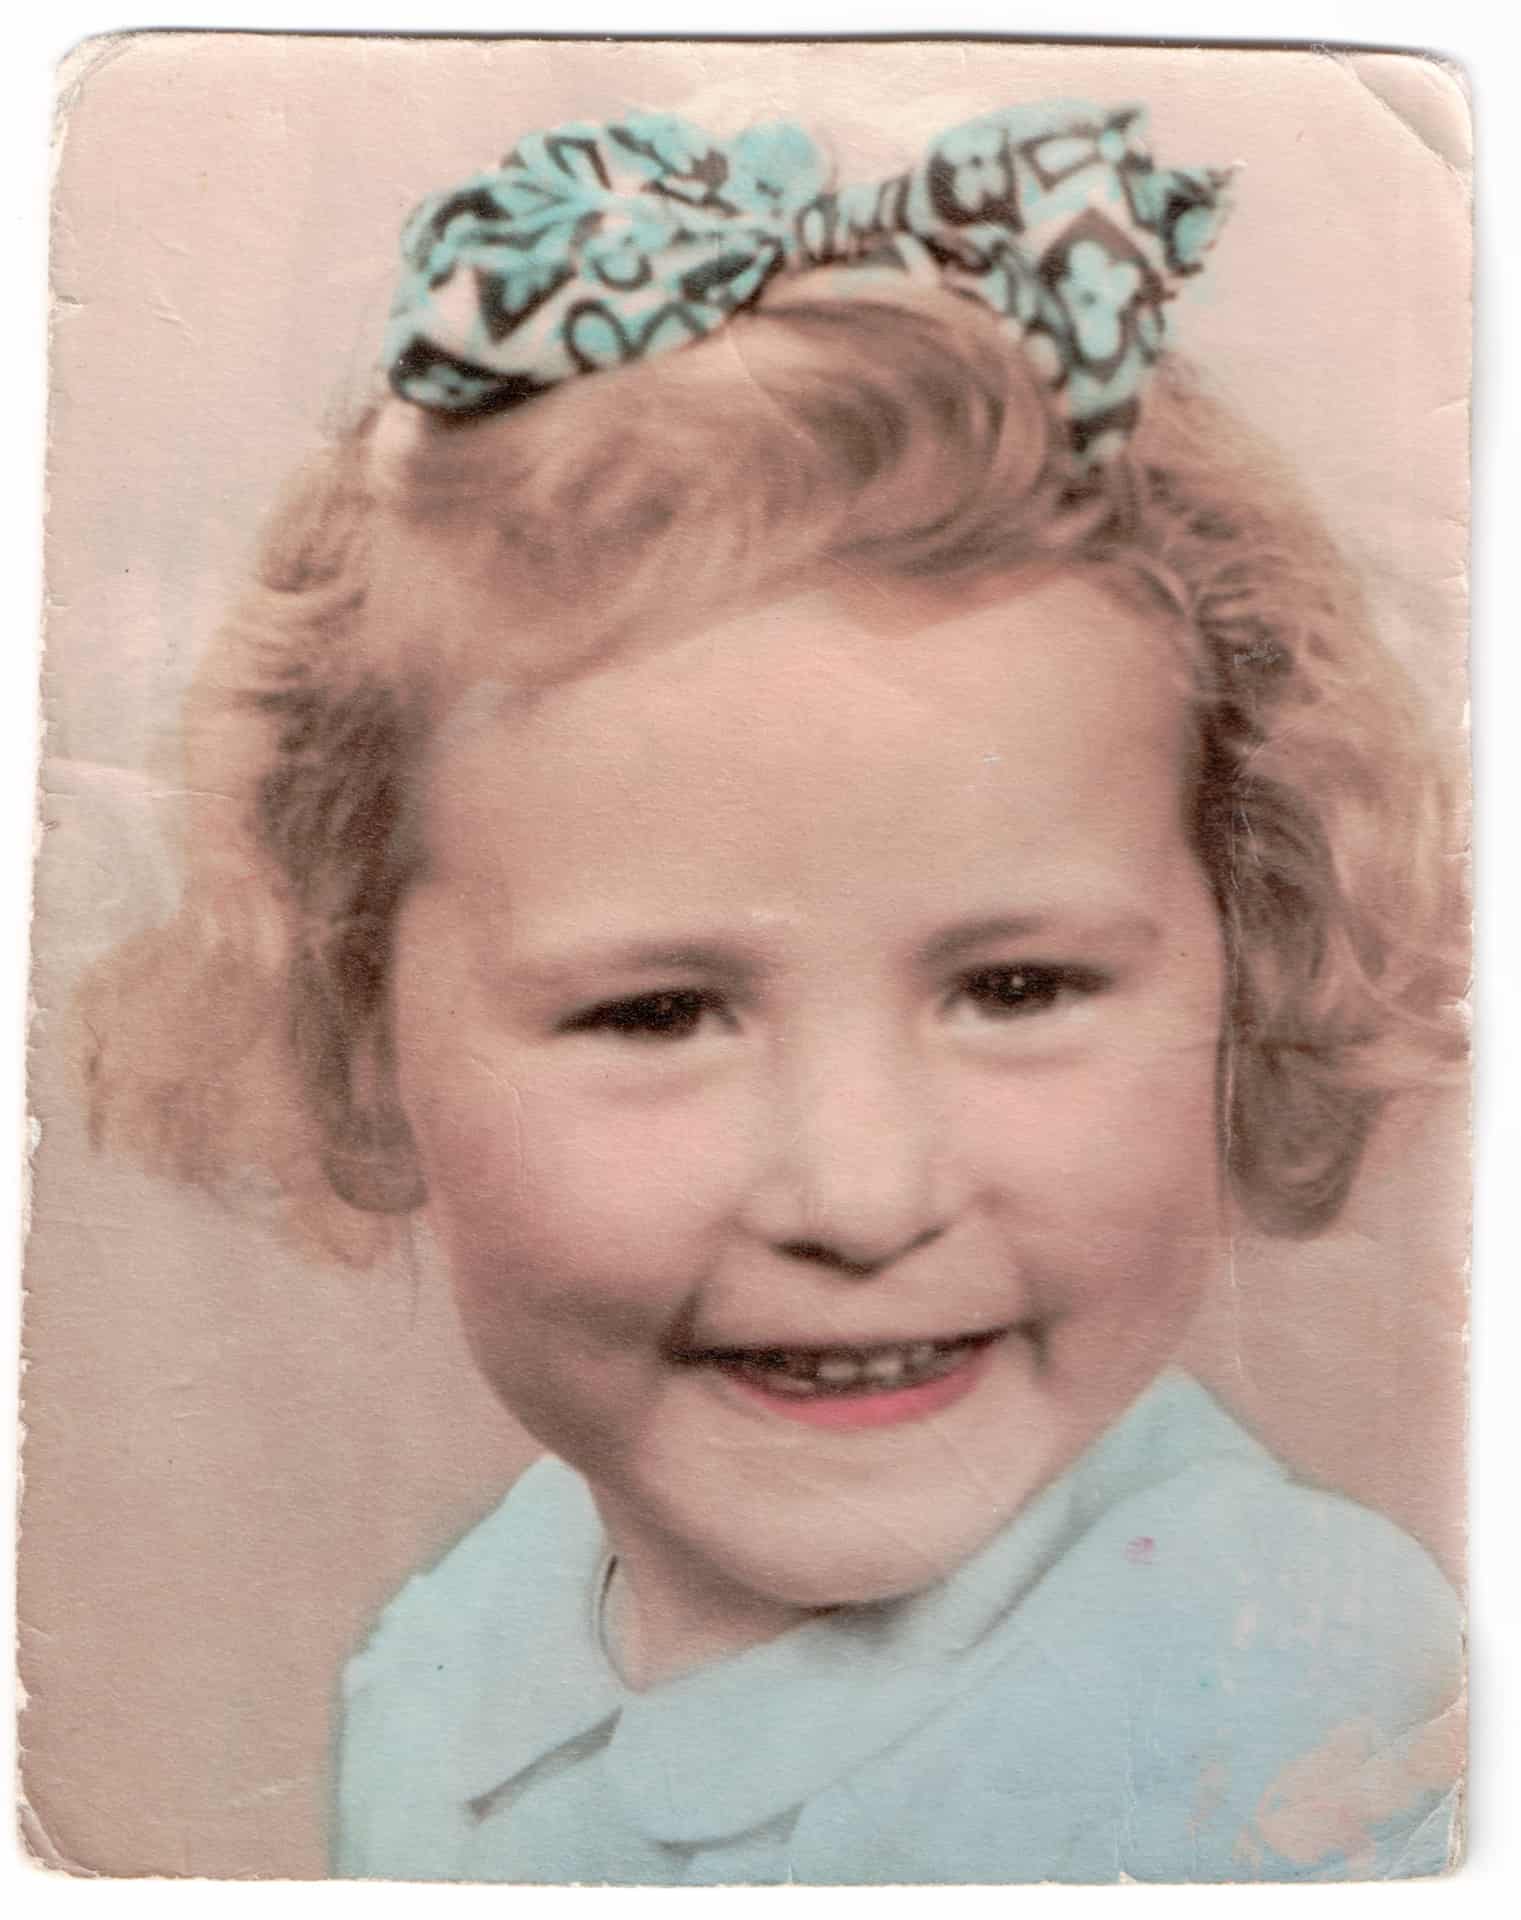 This one has been hand-tinted and was taken about the same time as the first one. I've got another one at home of me with the curly hair like that. 